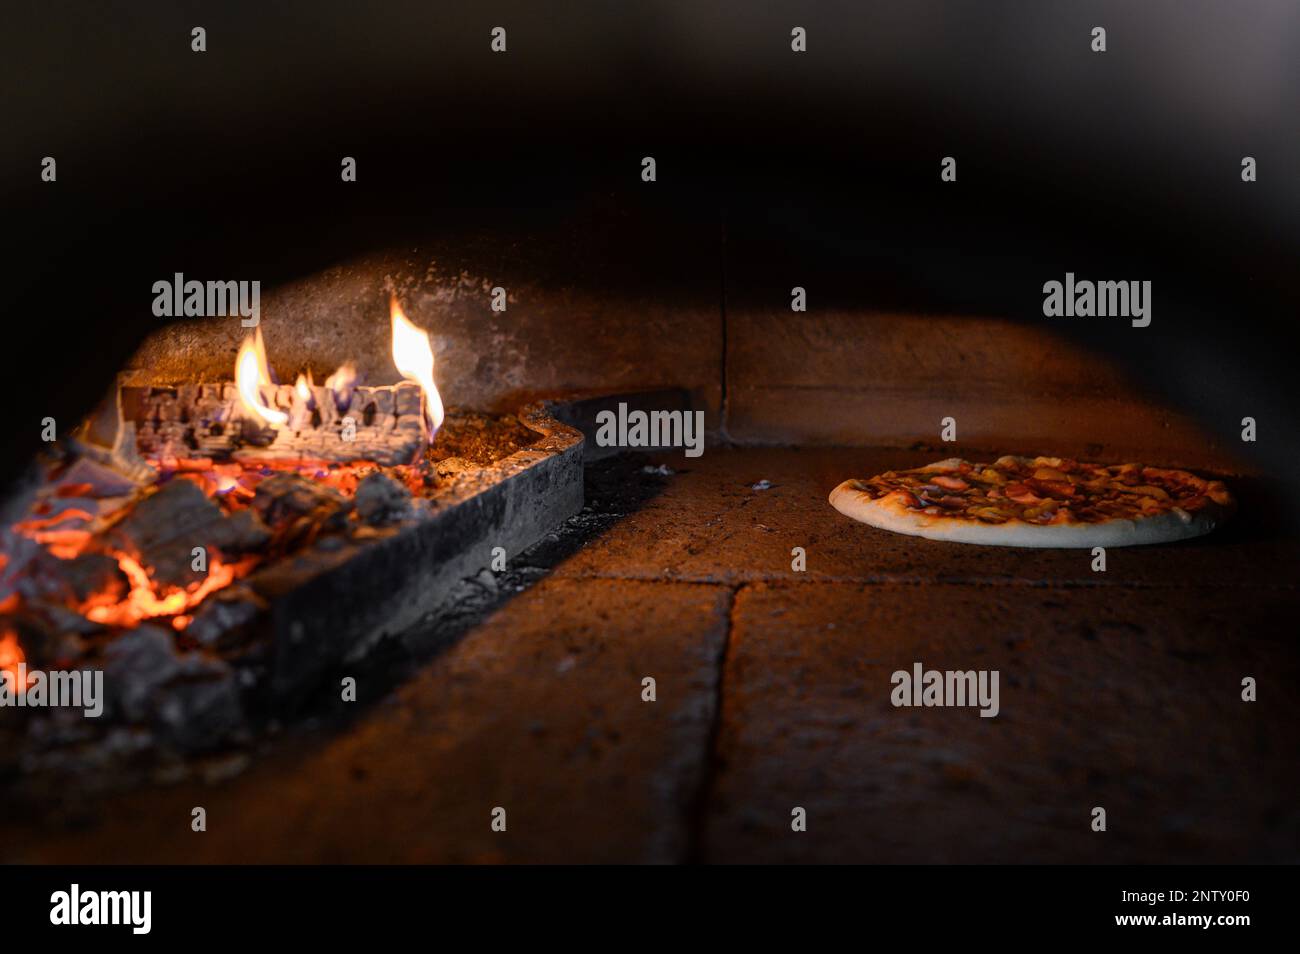 Pizza maker pushes the pizza on a wooden board into the stone oven. Burning firewood can be seen. Stock Photo